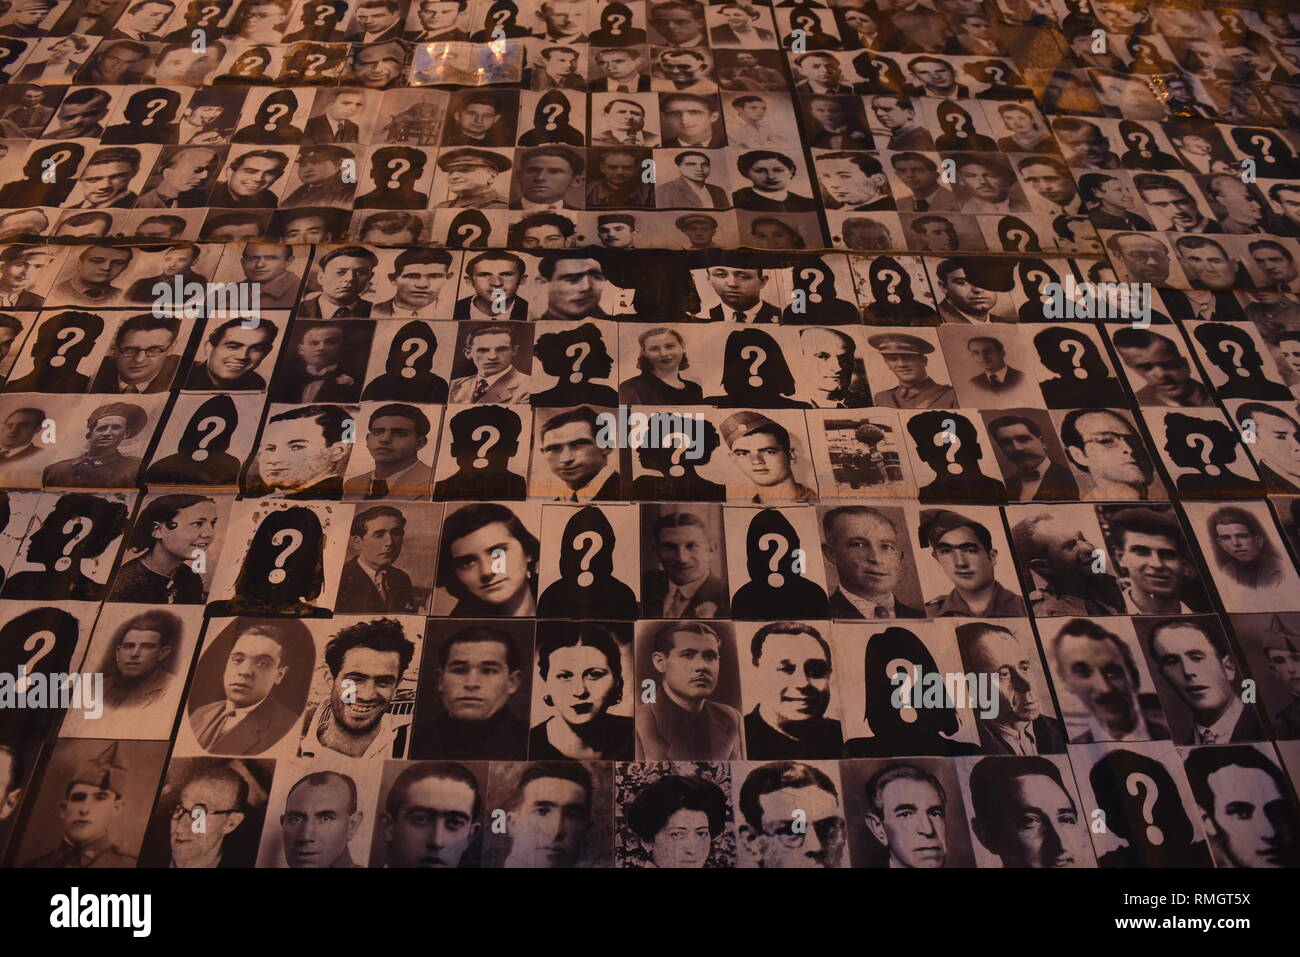 Pictures of missing people during the dictatorship of Francisco Franco (1936-1975)  are seen during the protest Around hundred people gathered in Madrid to protest against immunity for the crimes committed during the Spanish Civil War, the Francisco Franco's dictatorship, and to demand justice for victims and relatives. Stock Photo